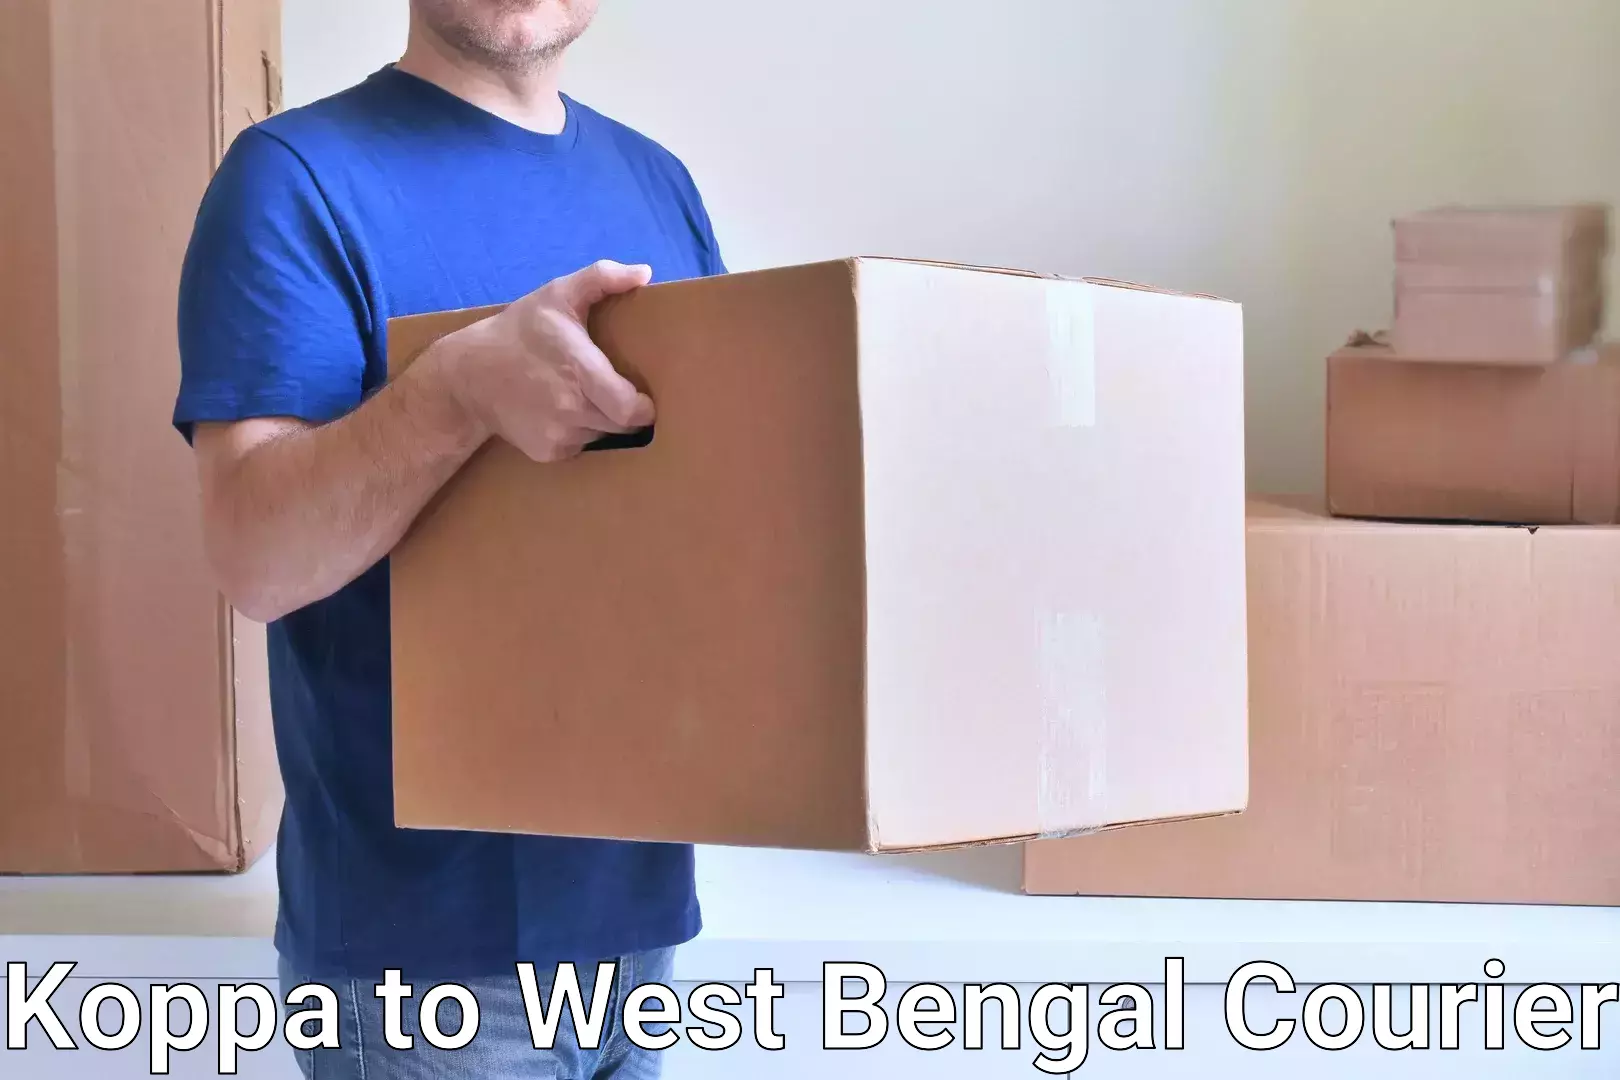 Subscription-based courier Koppa to West Bengal